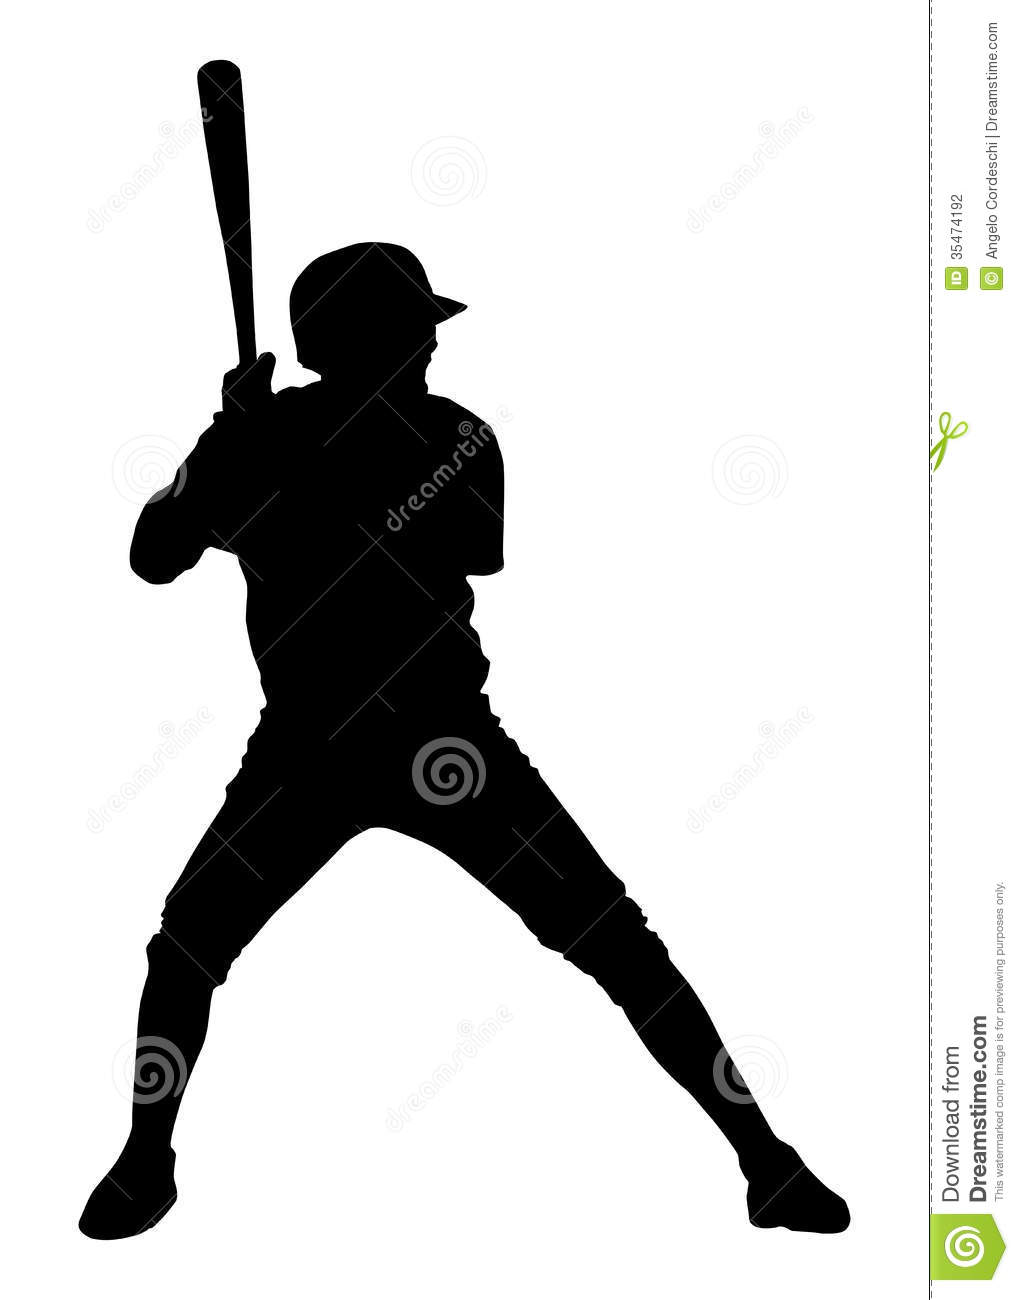 Baseball Player Clipart Black And White   Clipart Panda   Free Clipart    